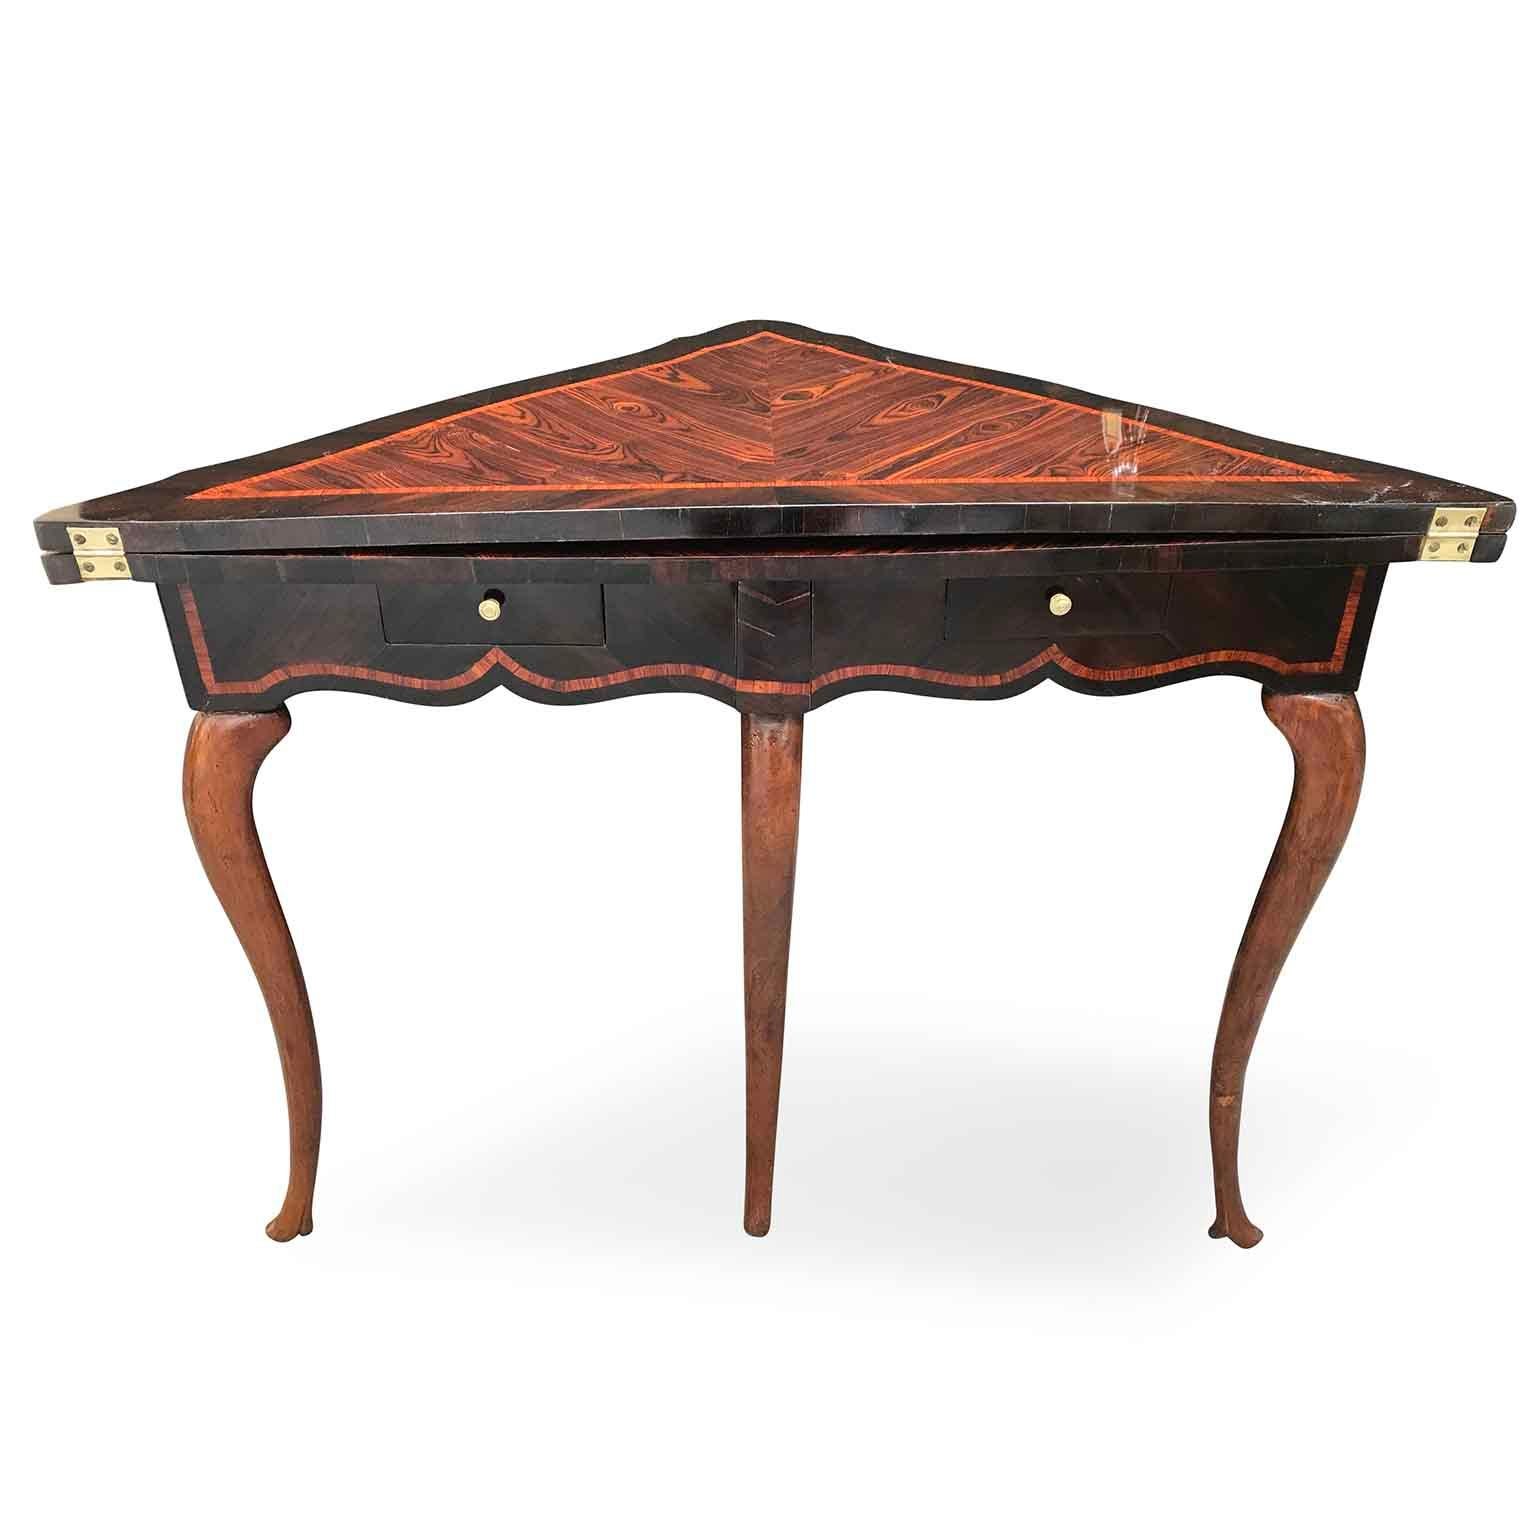 Exclusive Louis XIV Italian Genoese corner card table realized in rosewood and bois de rose, this elegant antique fold over game table dates back to the first half of 18th century. 
Two small drawers on the frontal apron resting on round section à